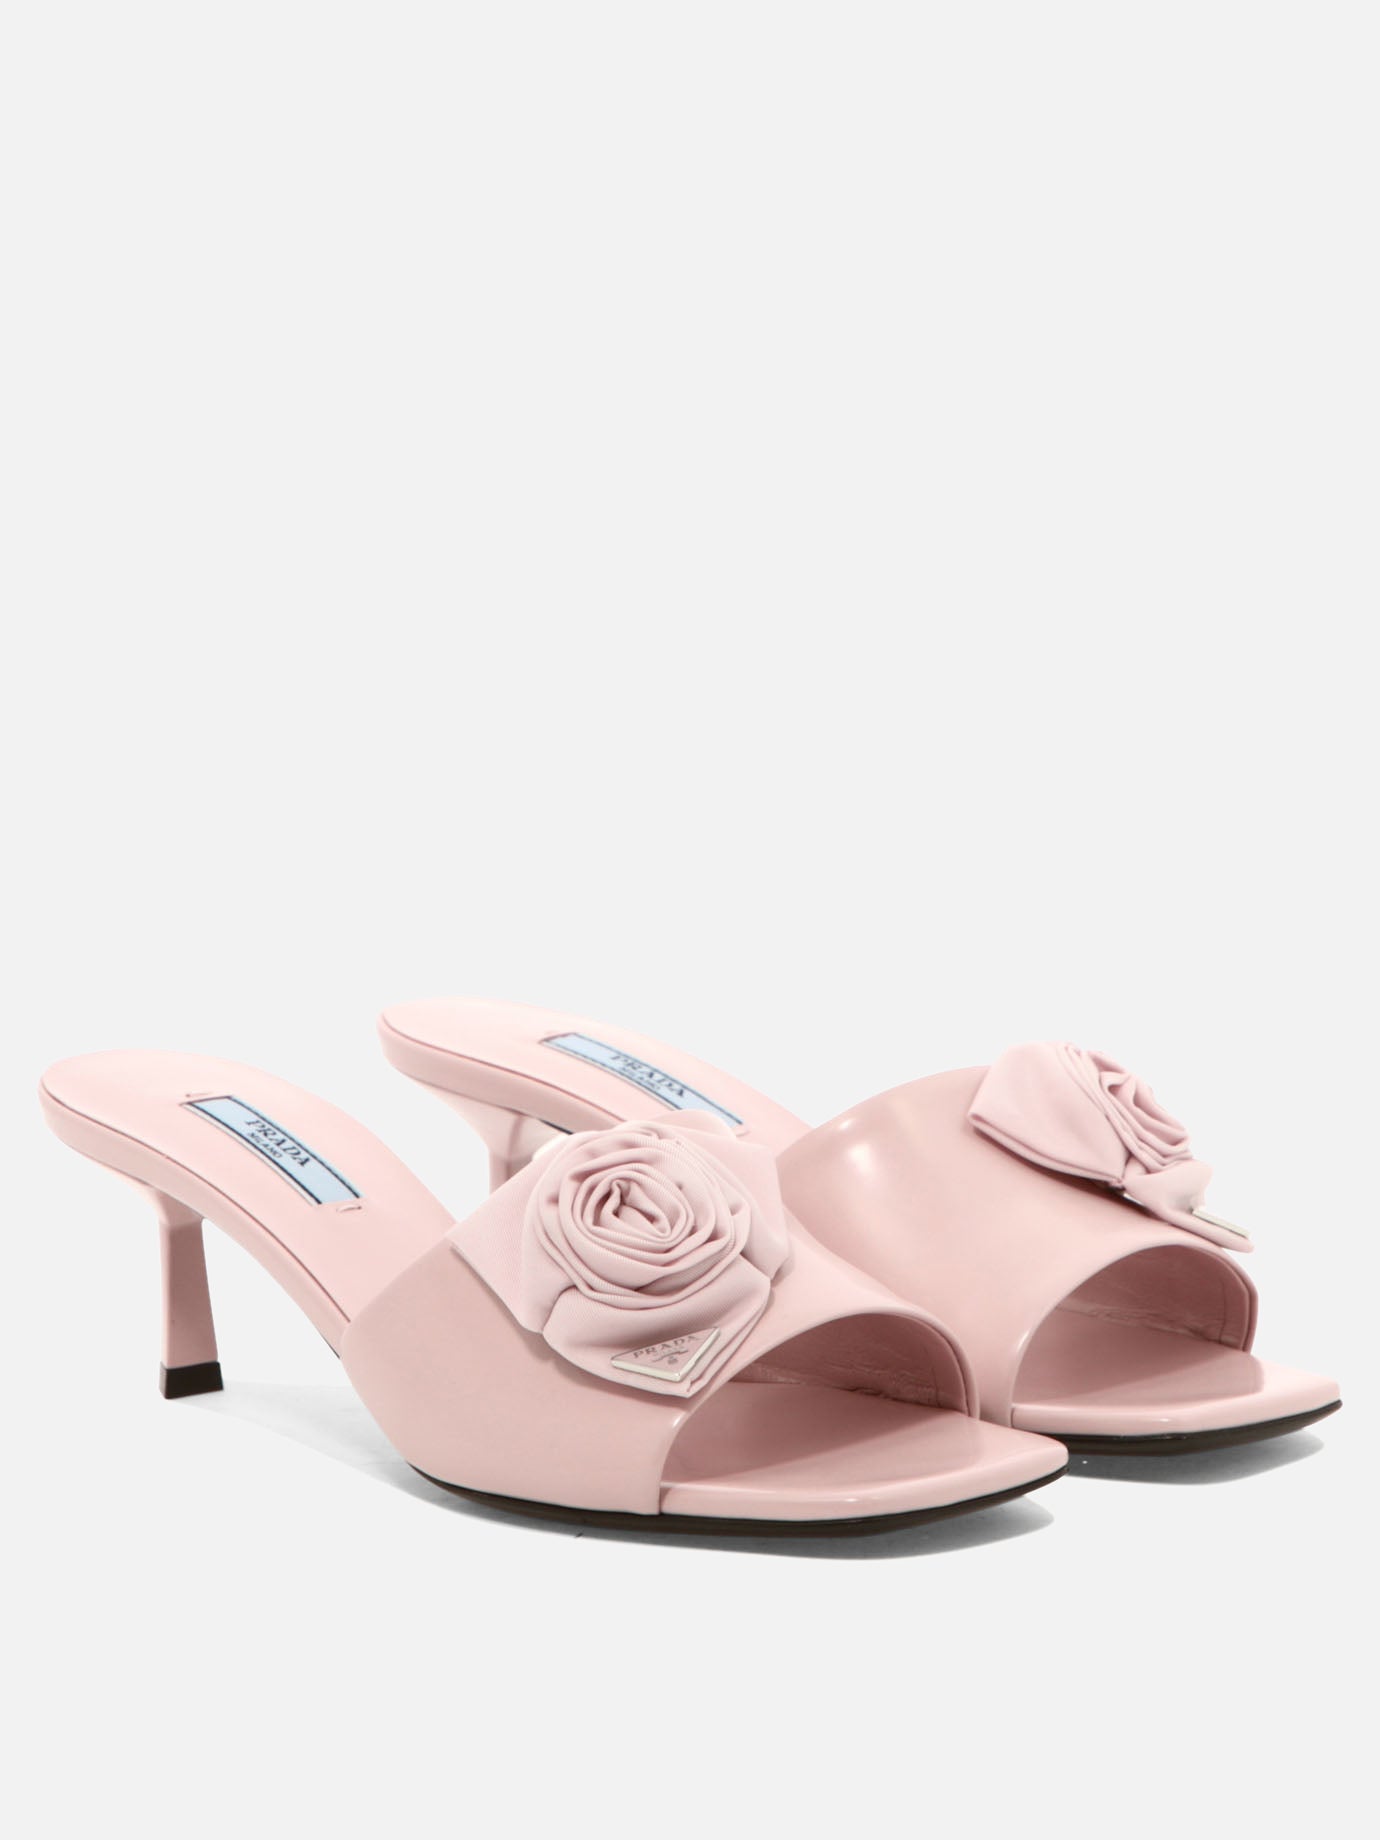 Sandals with applied rose